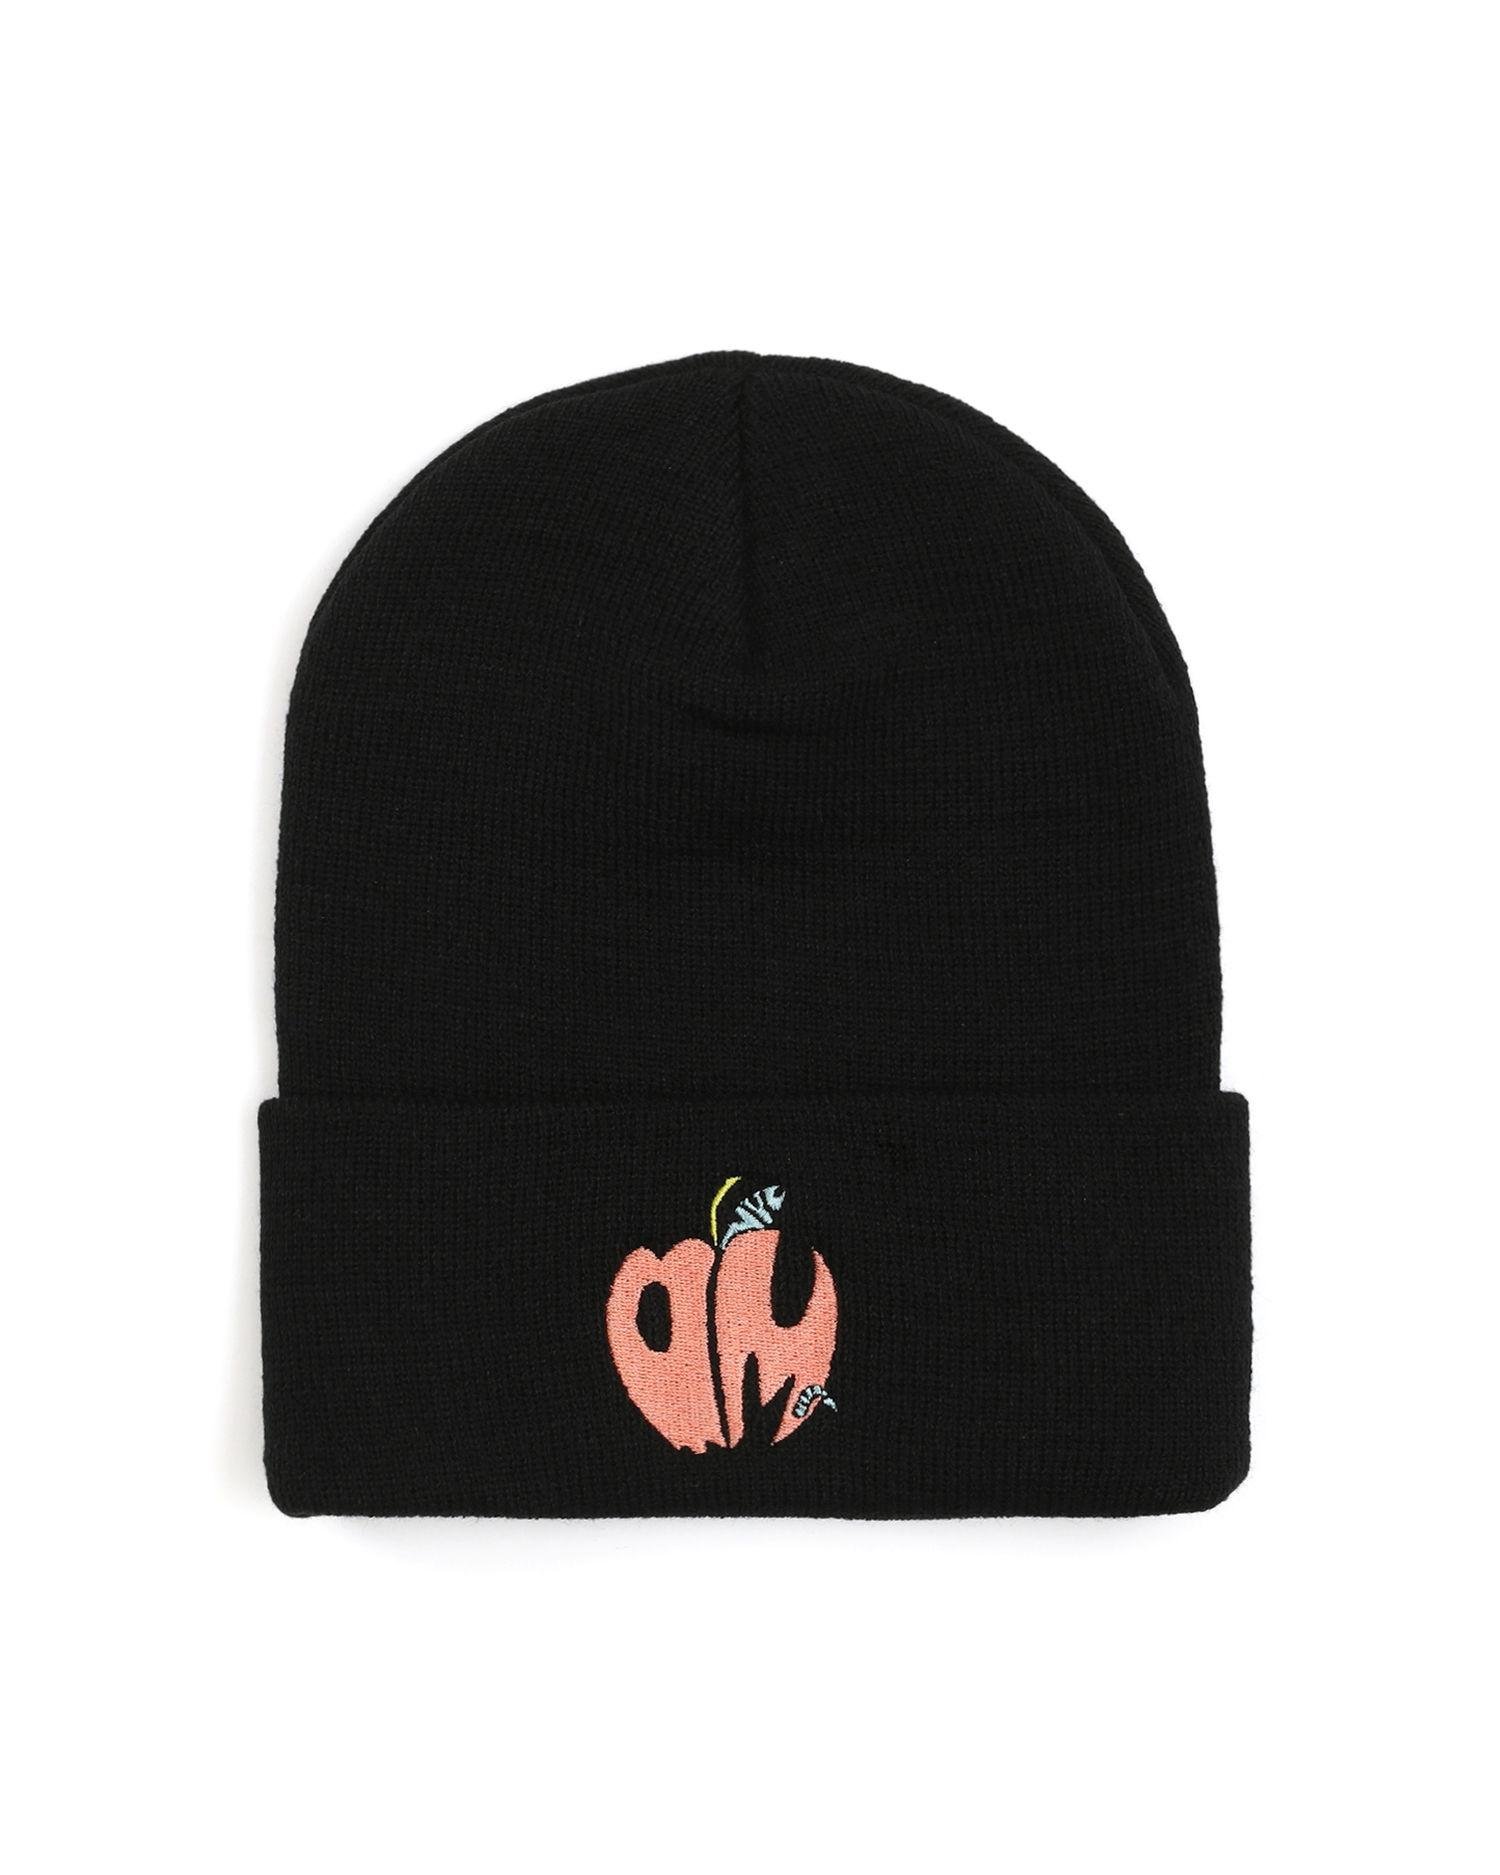 Logo embroidered beanie by AFTER MIDNIGHT